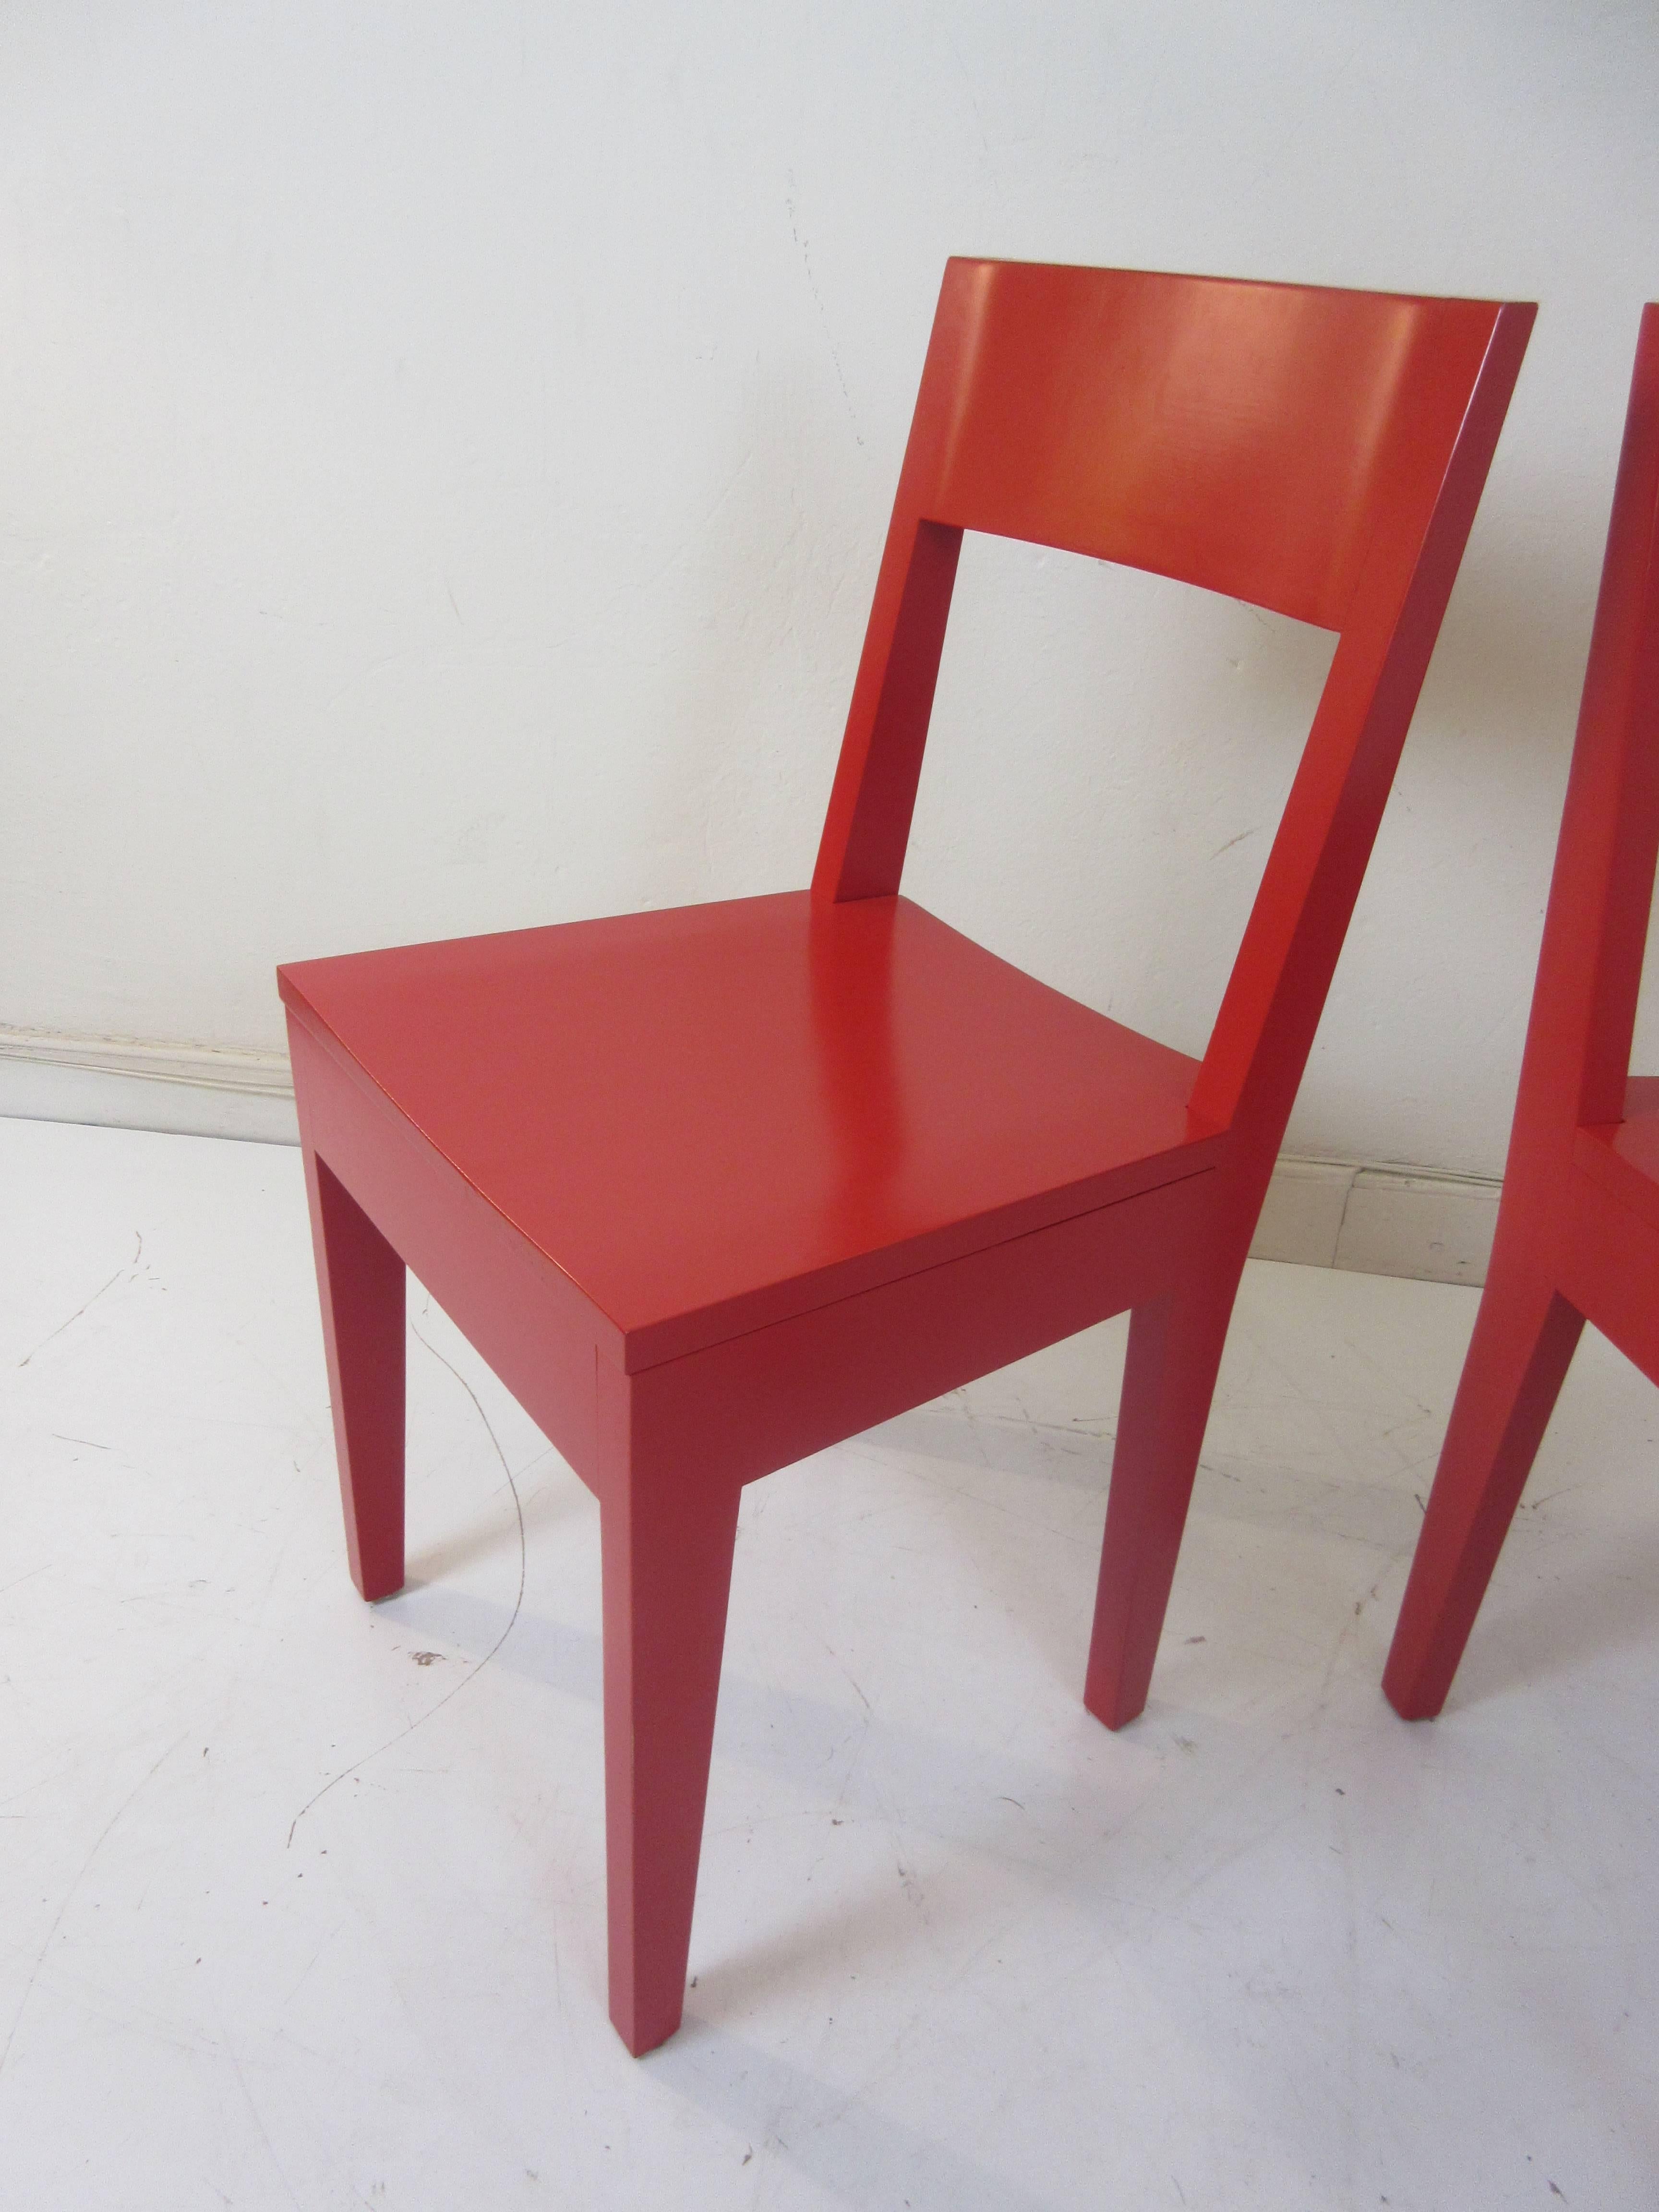 Bright red solid wood chairs finished in a red lacquer. Bought in the 1990s from a Philadelphia design furniture store Usonia.